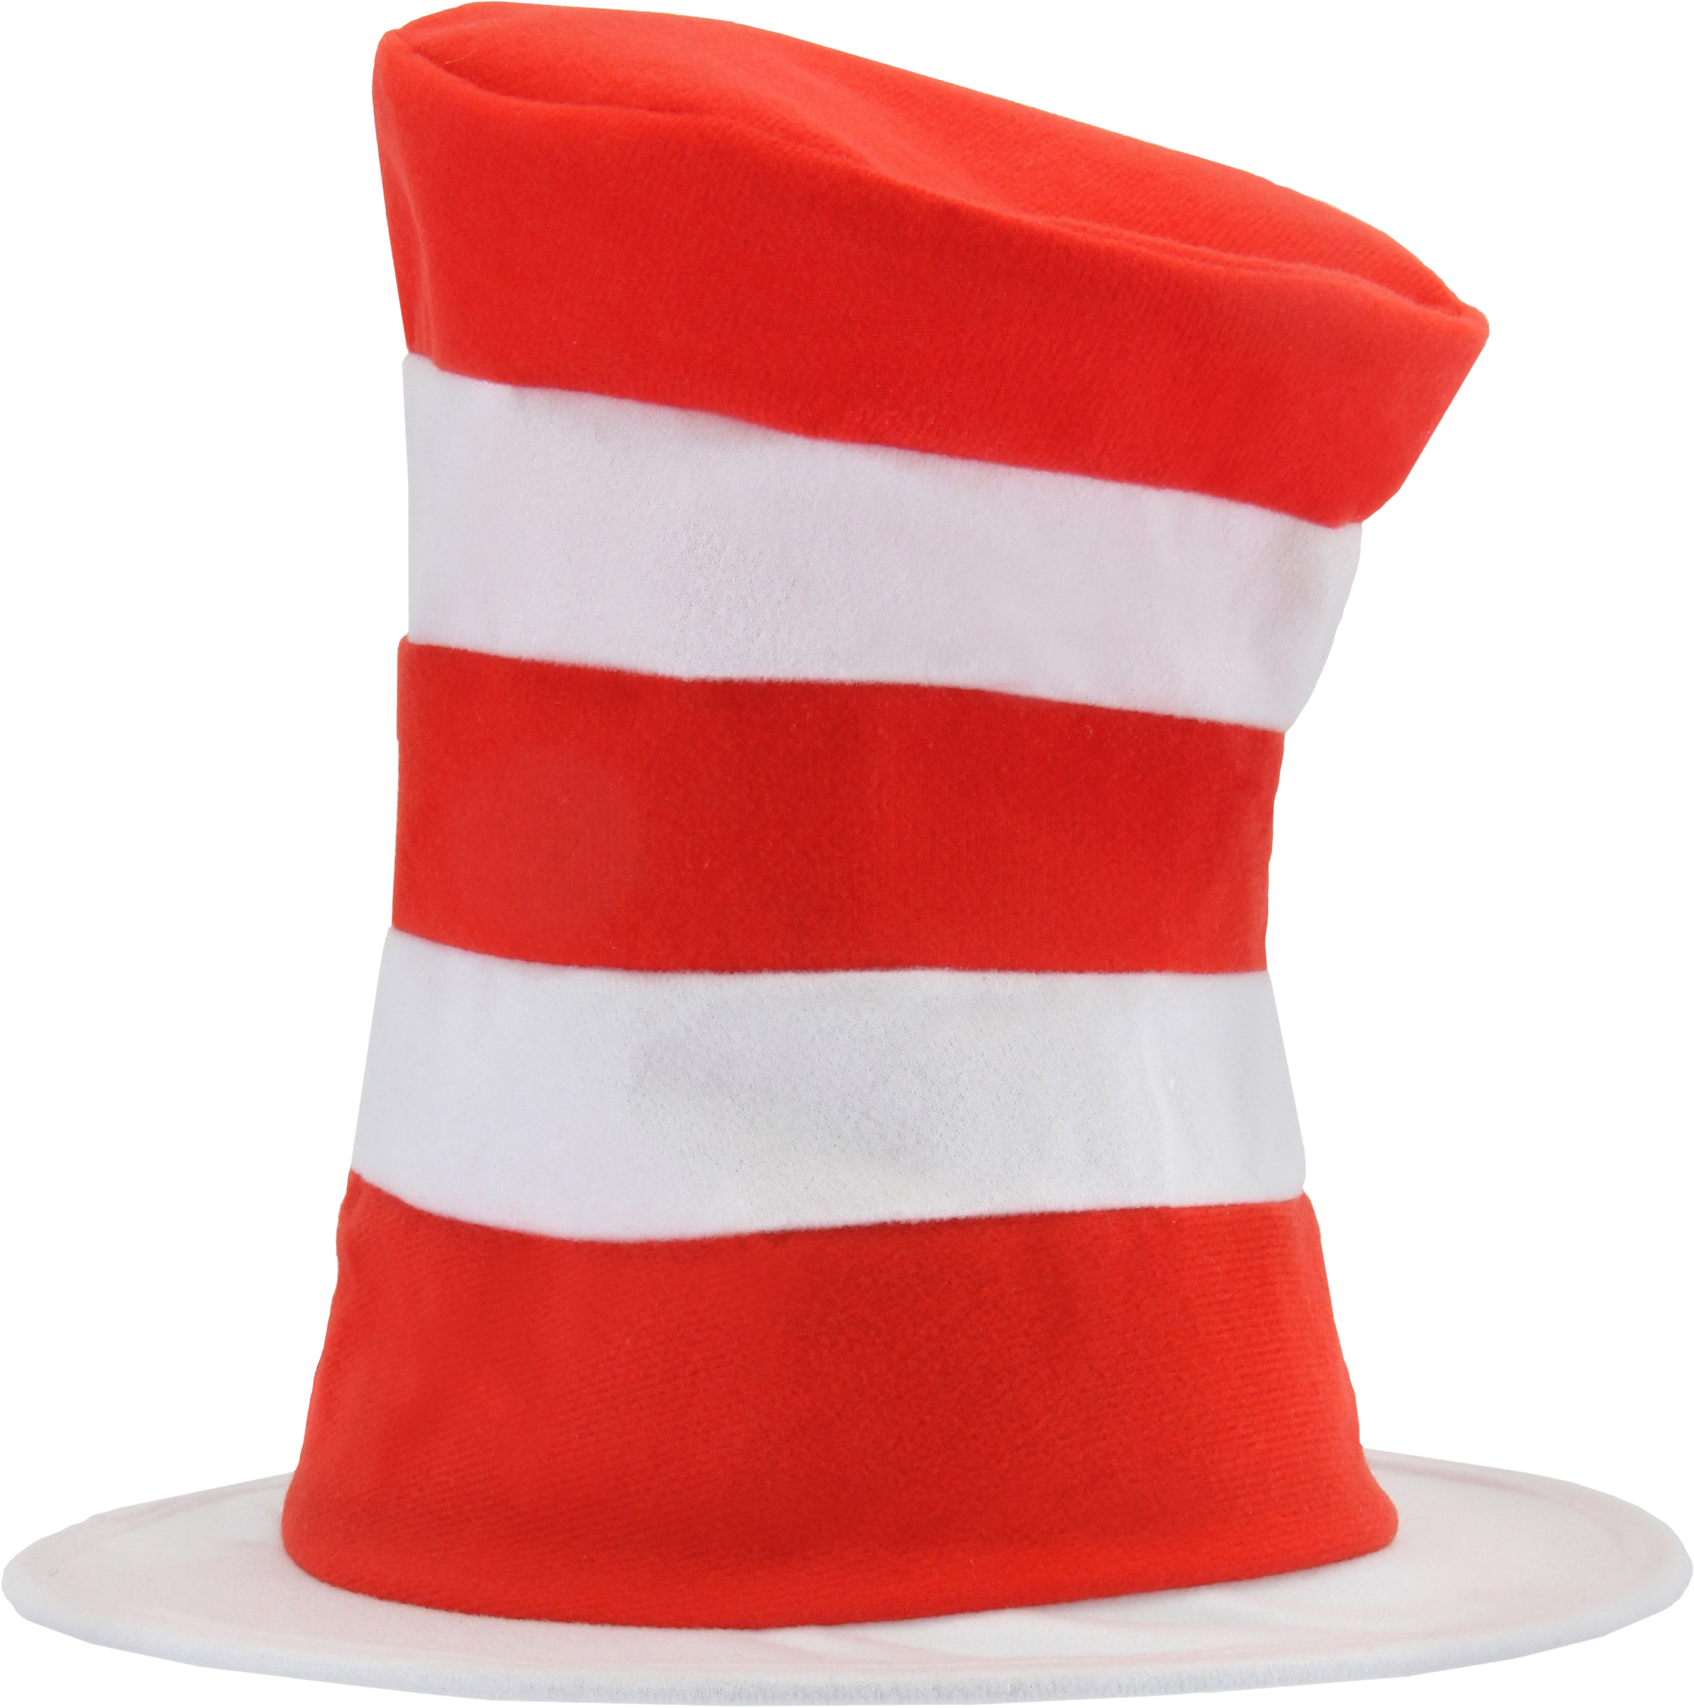 A Red And White Striped Hat